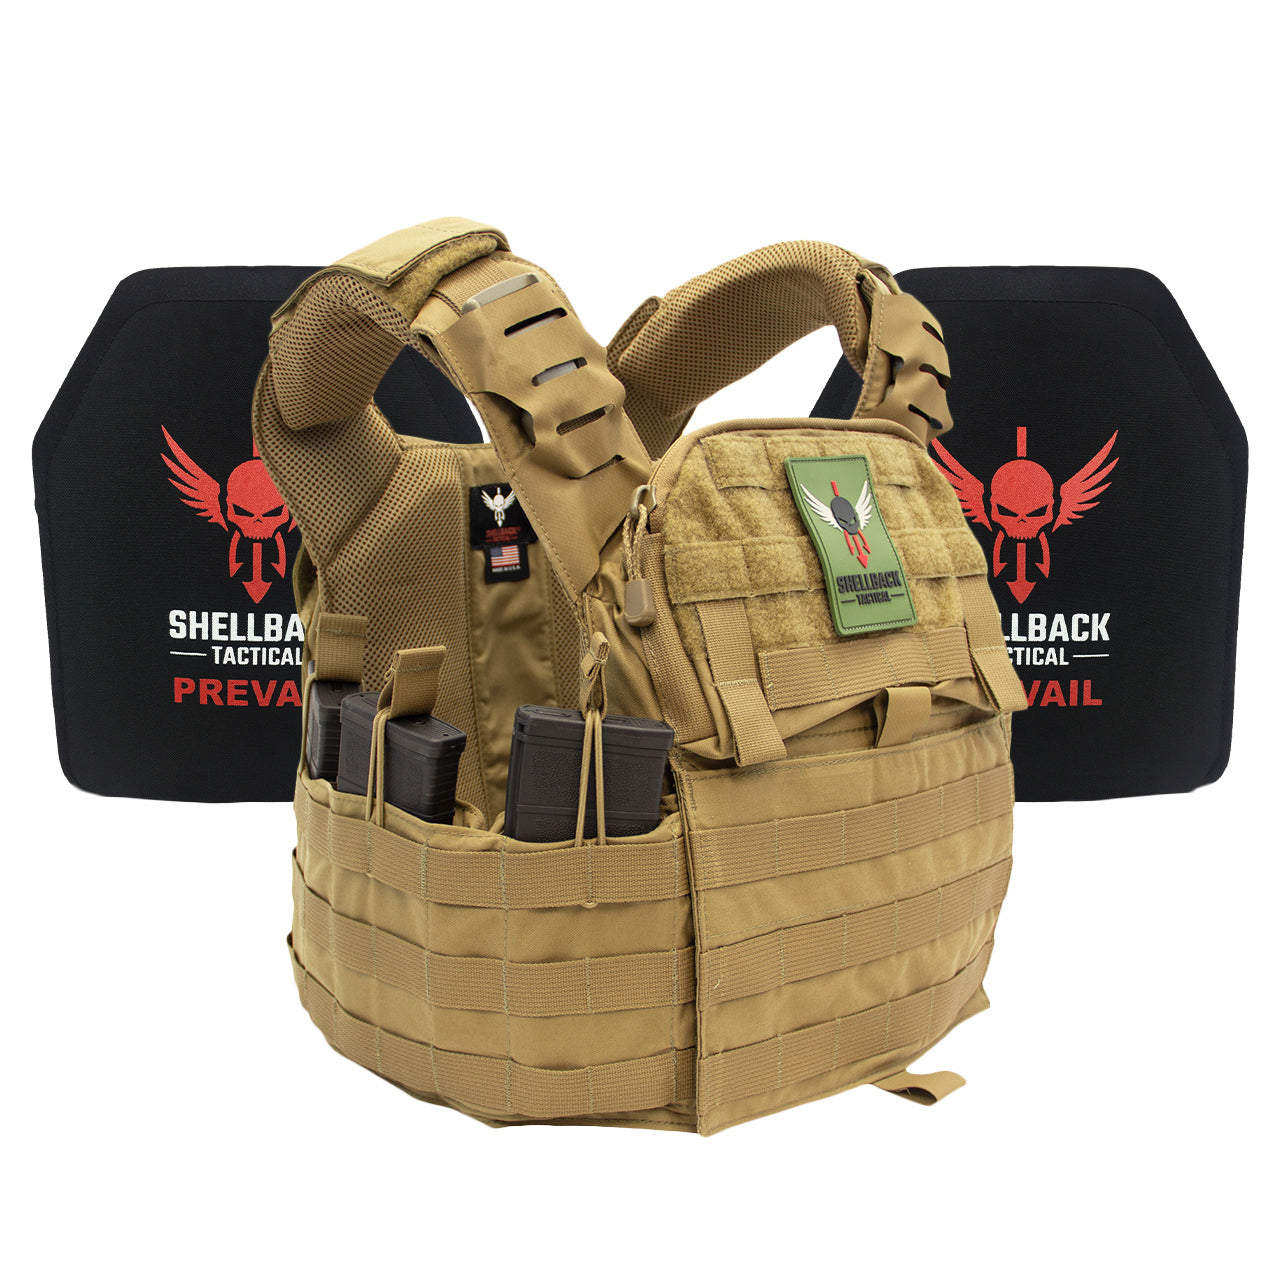 A Shellback Tactical Banshee Elite 2.0 Active Shooter Kit with Level III Single Curve 10 x 12 Hard Armor plate carrier with a holster on it.